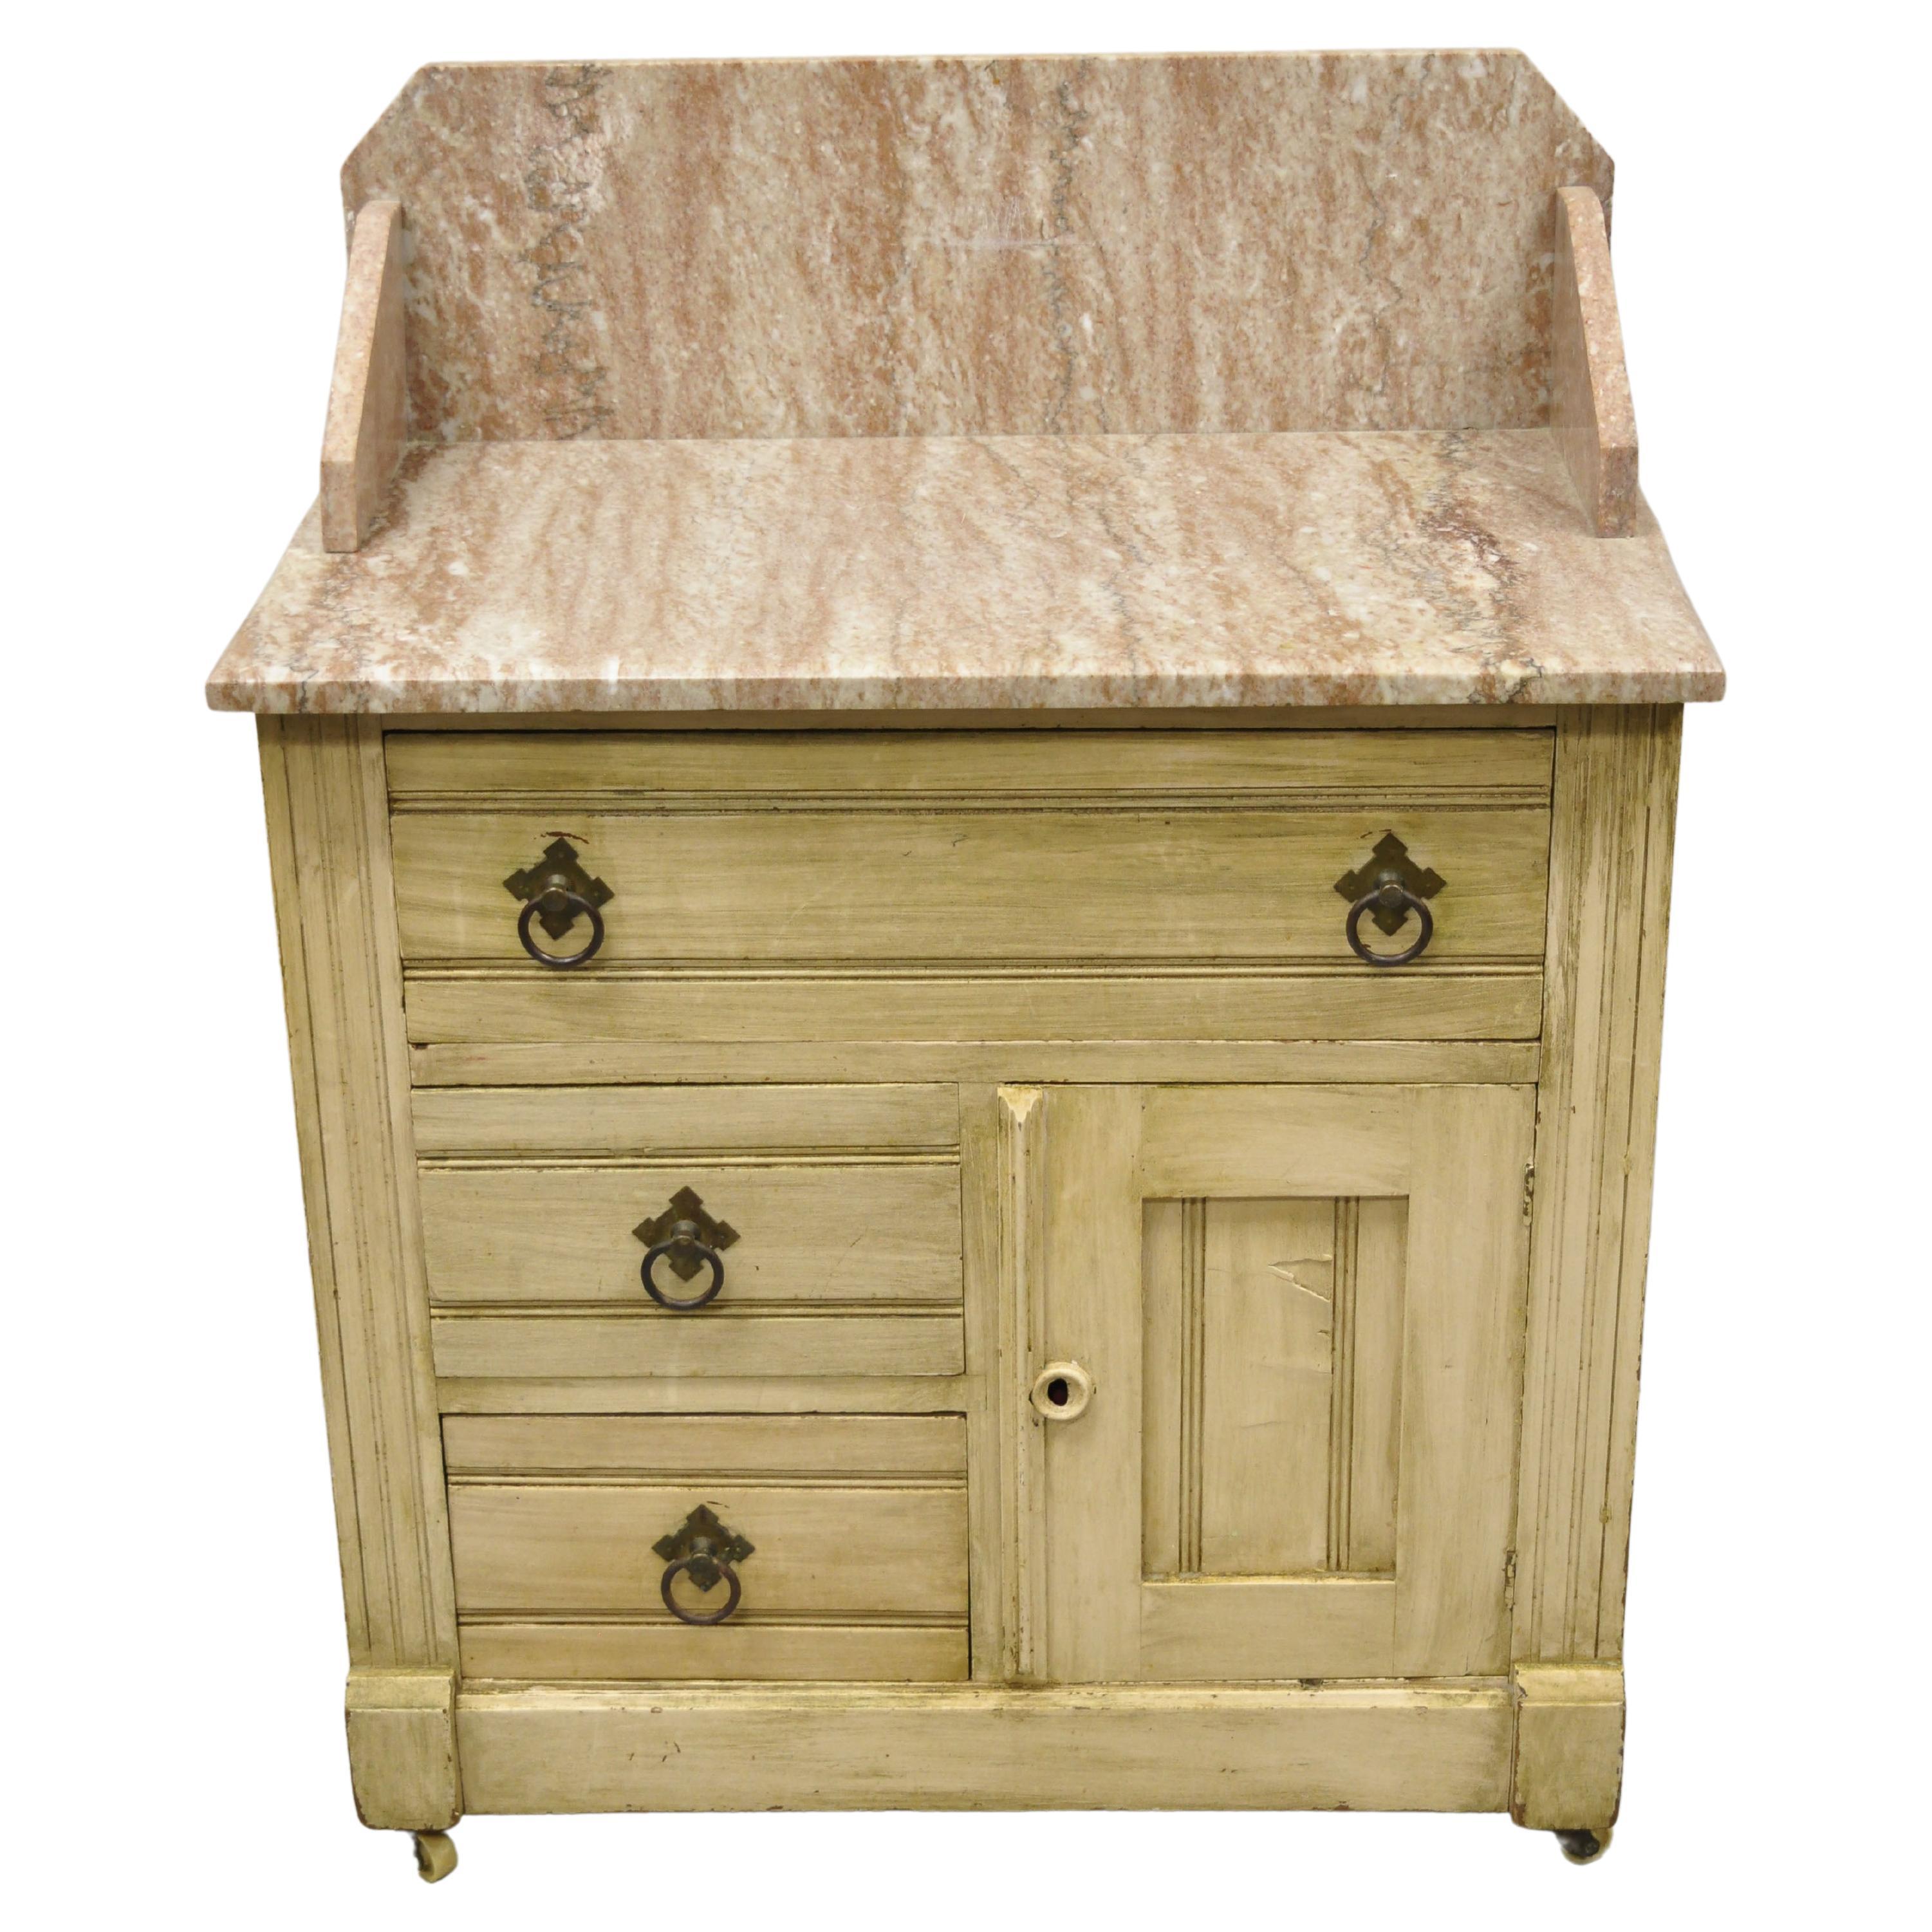 19th C. American Victorian Pink Marble Top Backsplash Washstand Table Cabinet For Sale